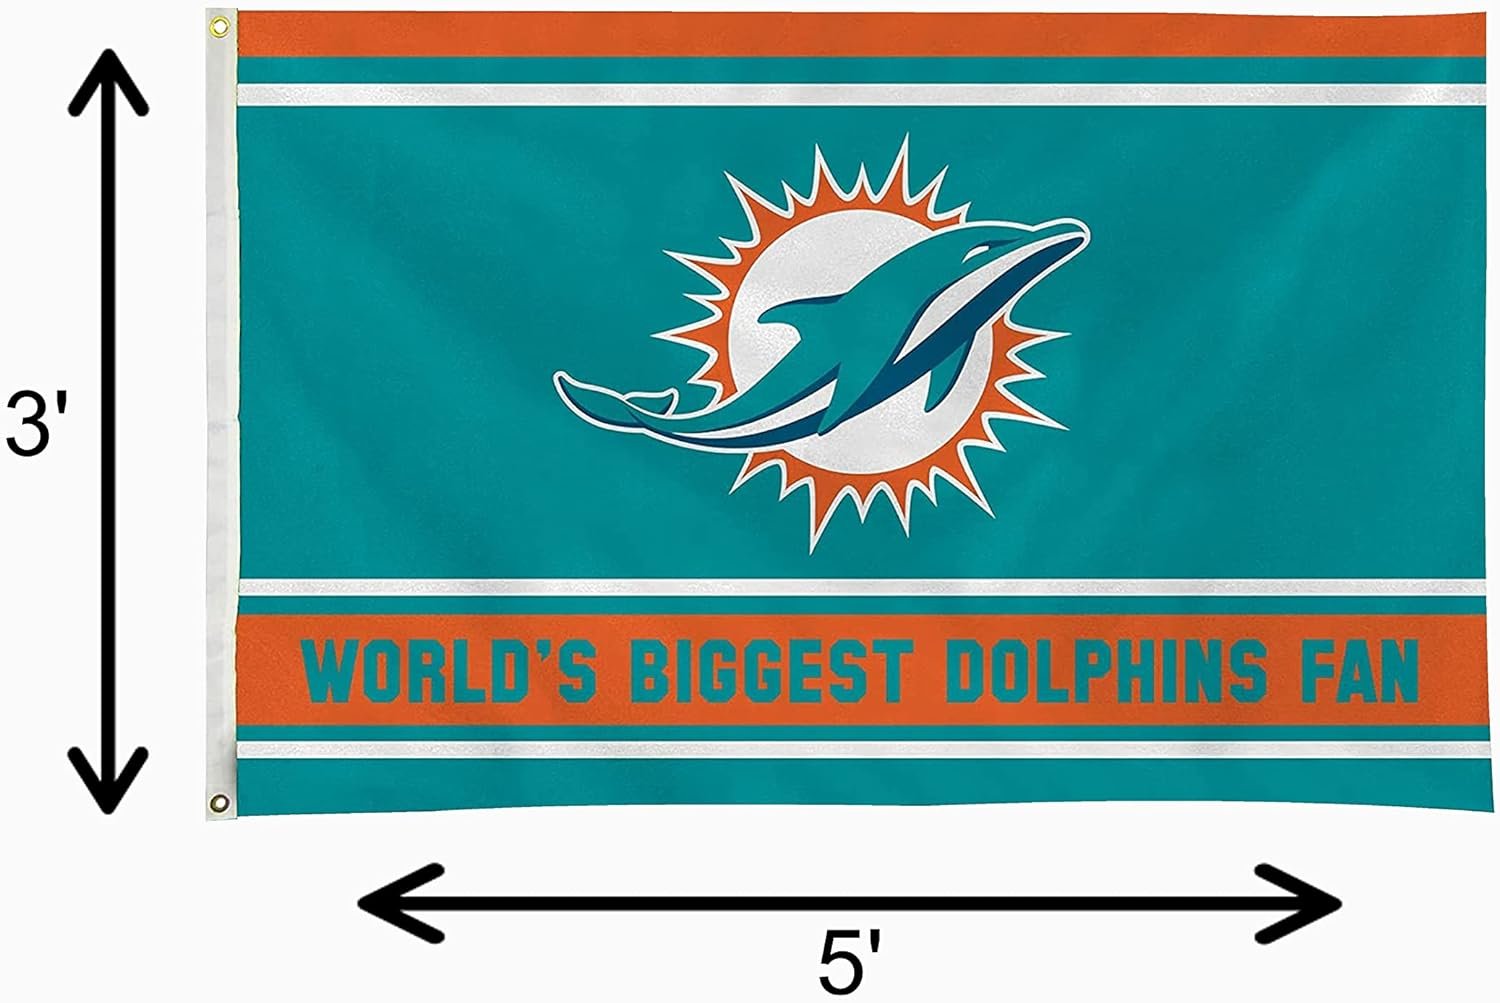 Miami Dolphins 3x5 Feet Flag Banner, World's Biggest Fan, Metal Grommets, Single Sided, Indoor or Outdoor Use